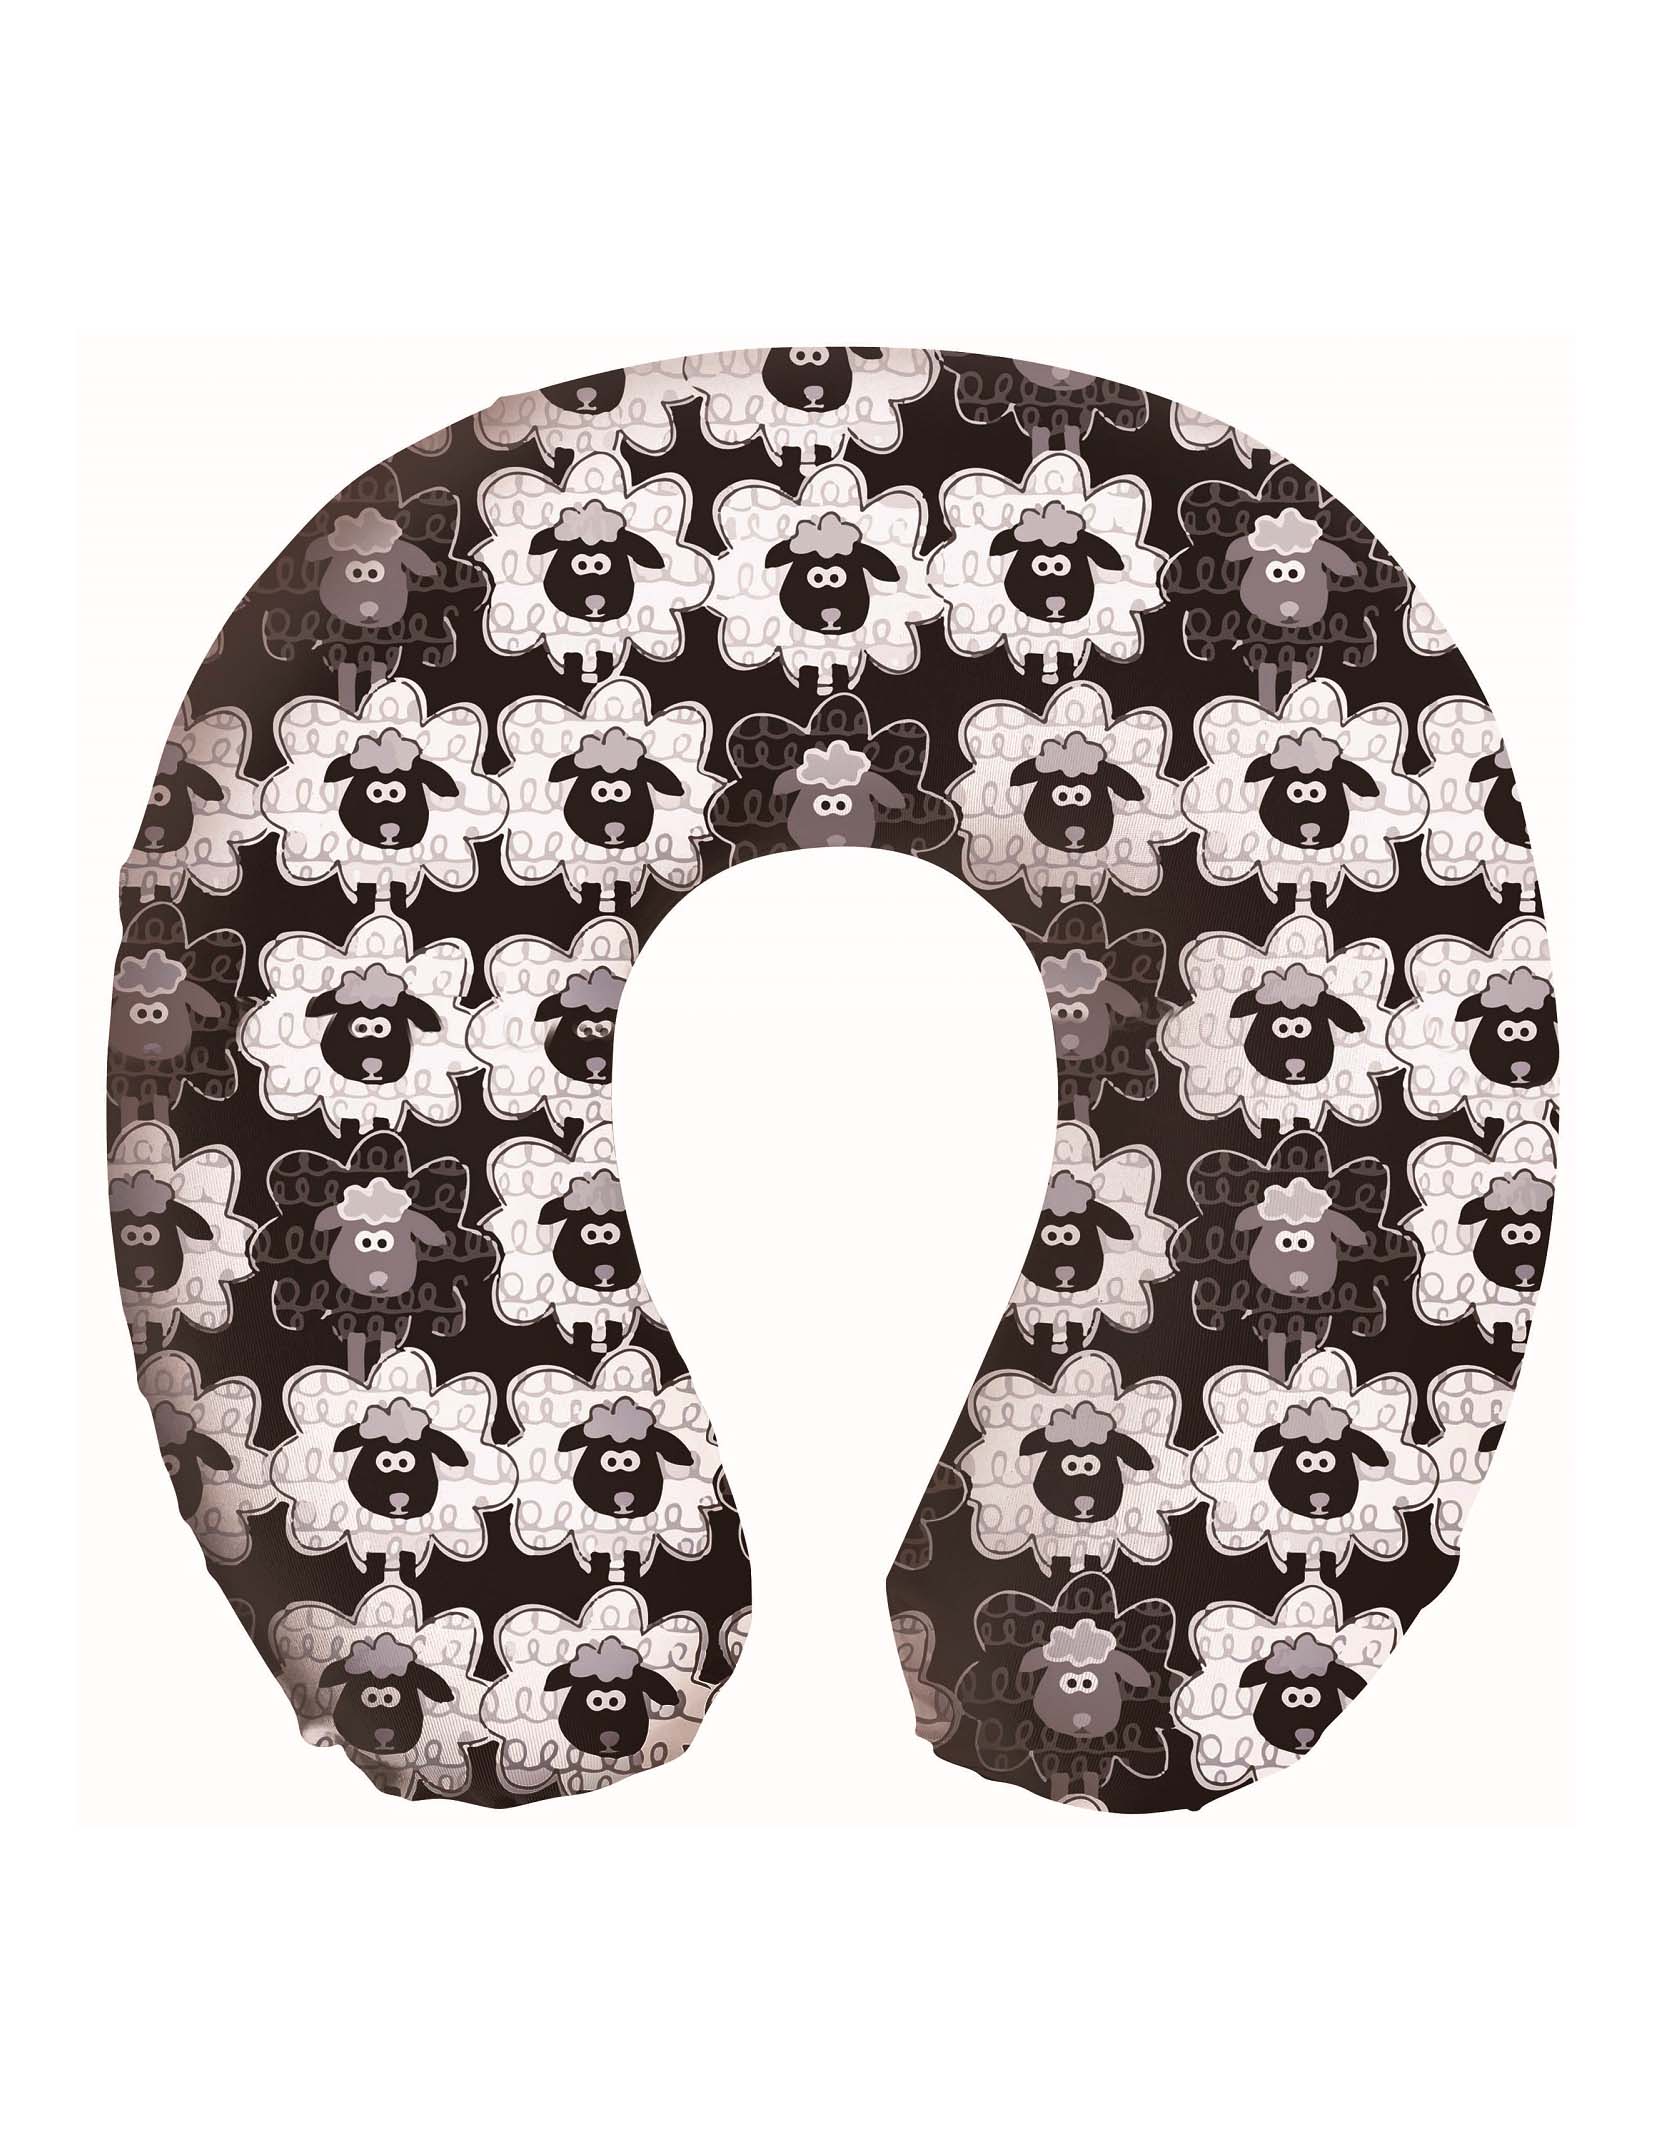 Voyager Smartpac Memory Foam Travel Pillow product photo